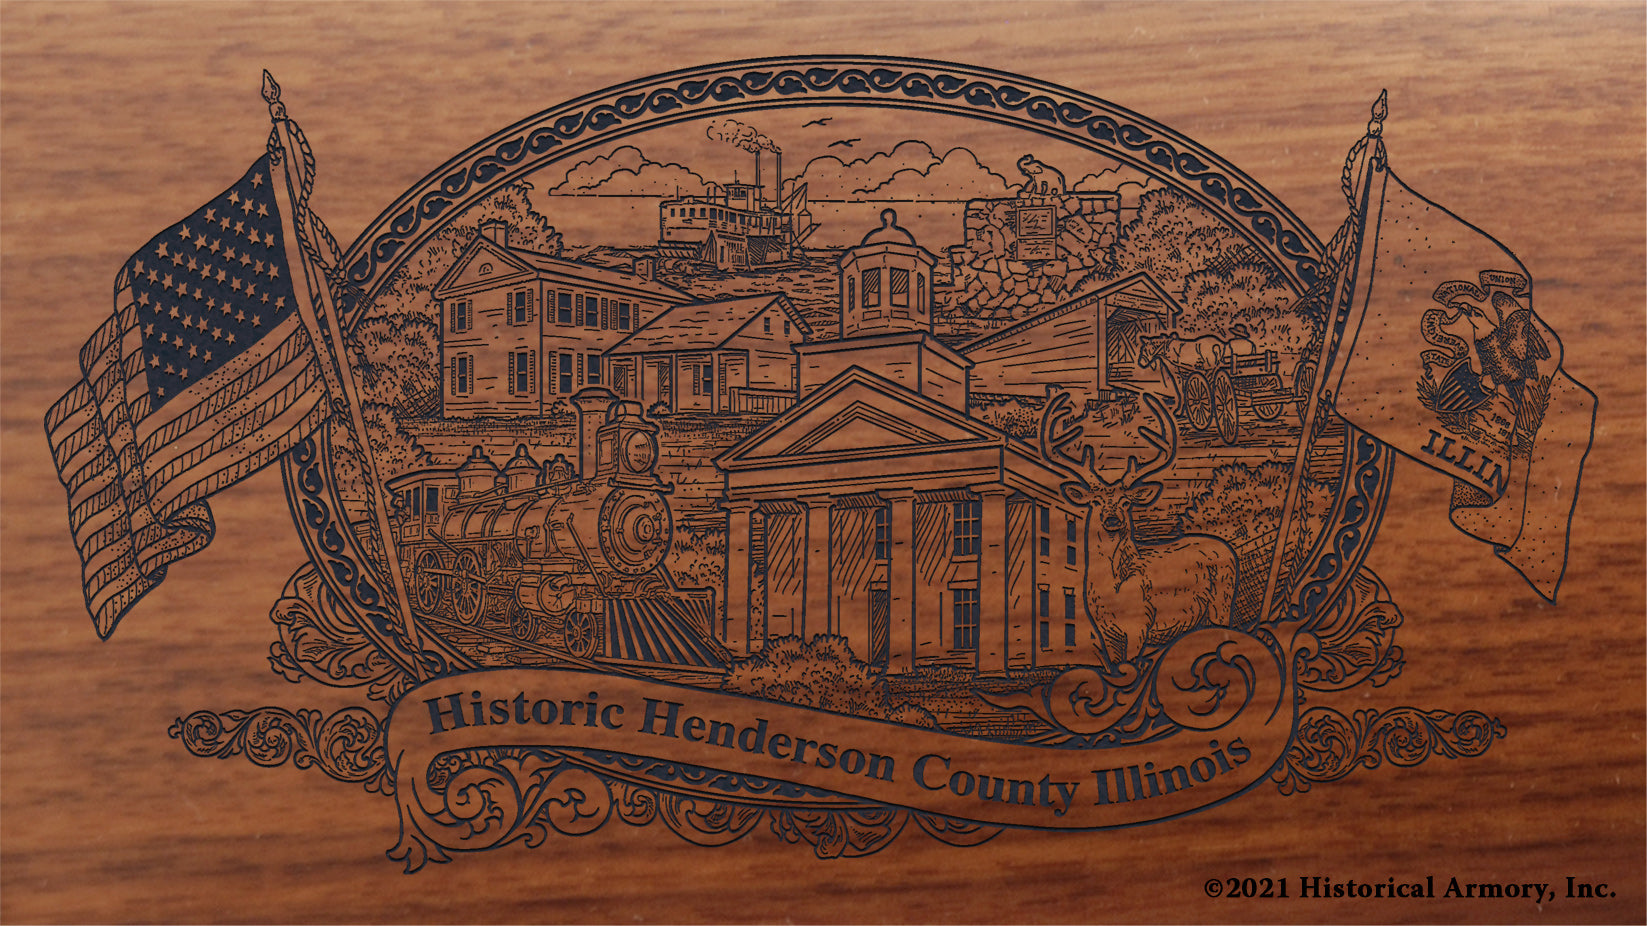 Engraved artwork | History of Henderson County Illinois | Historical Armory